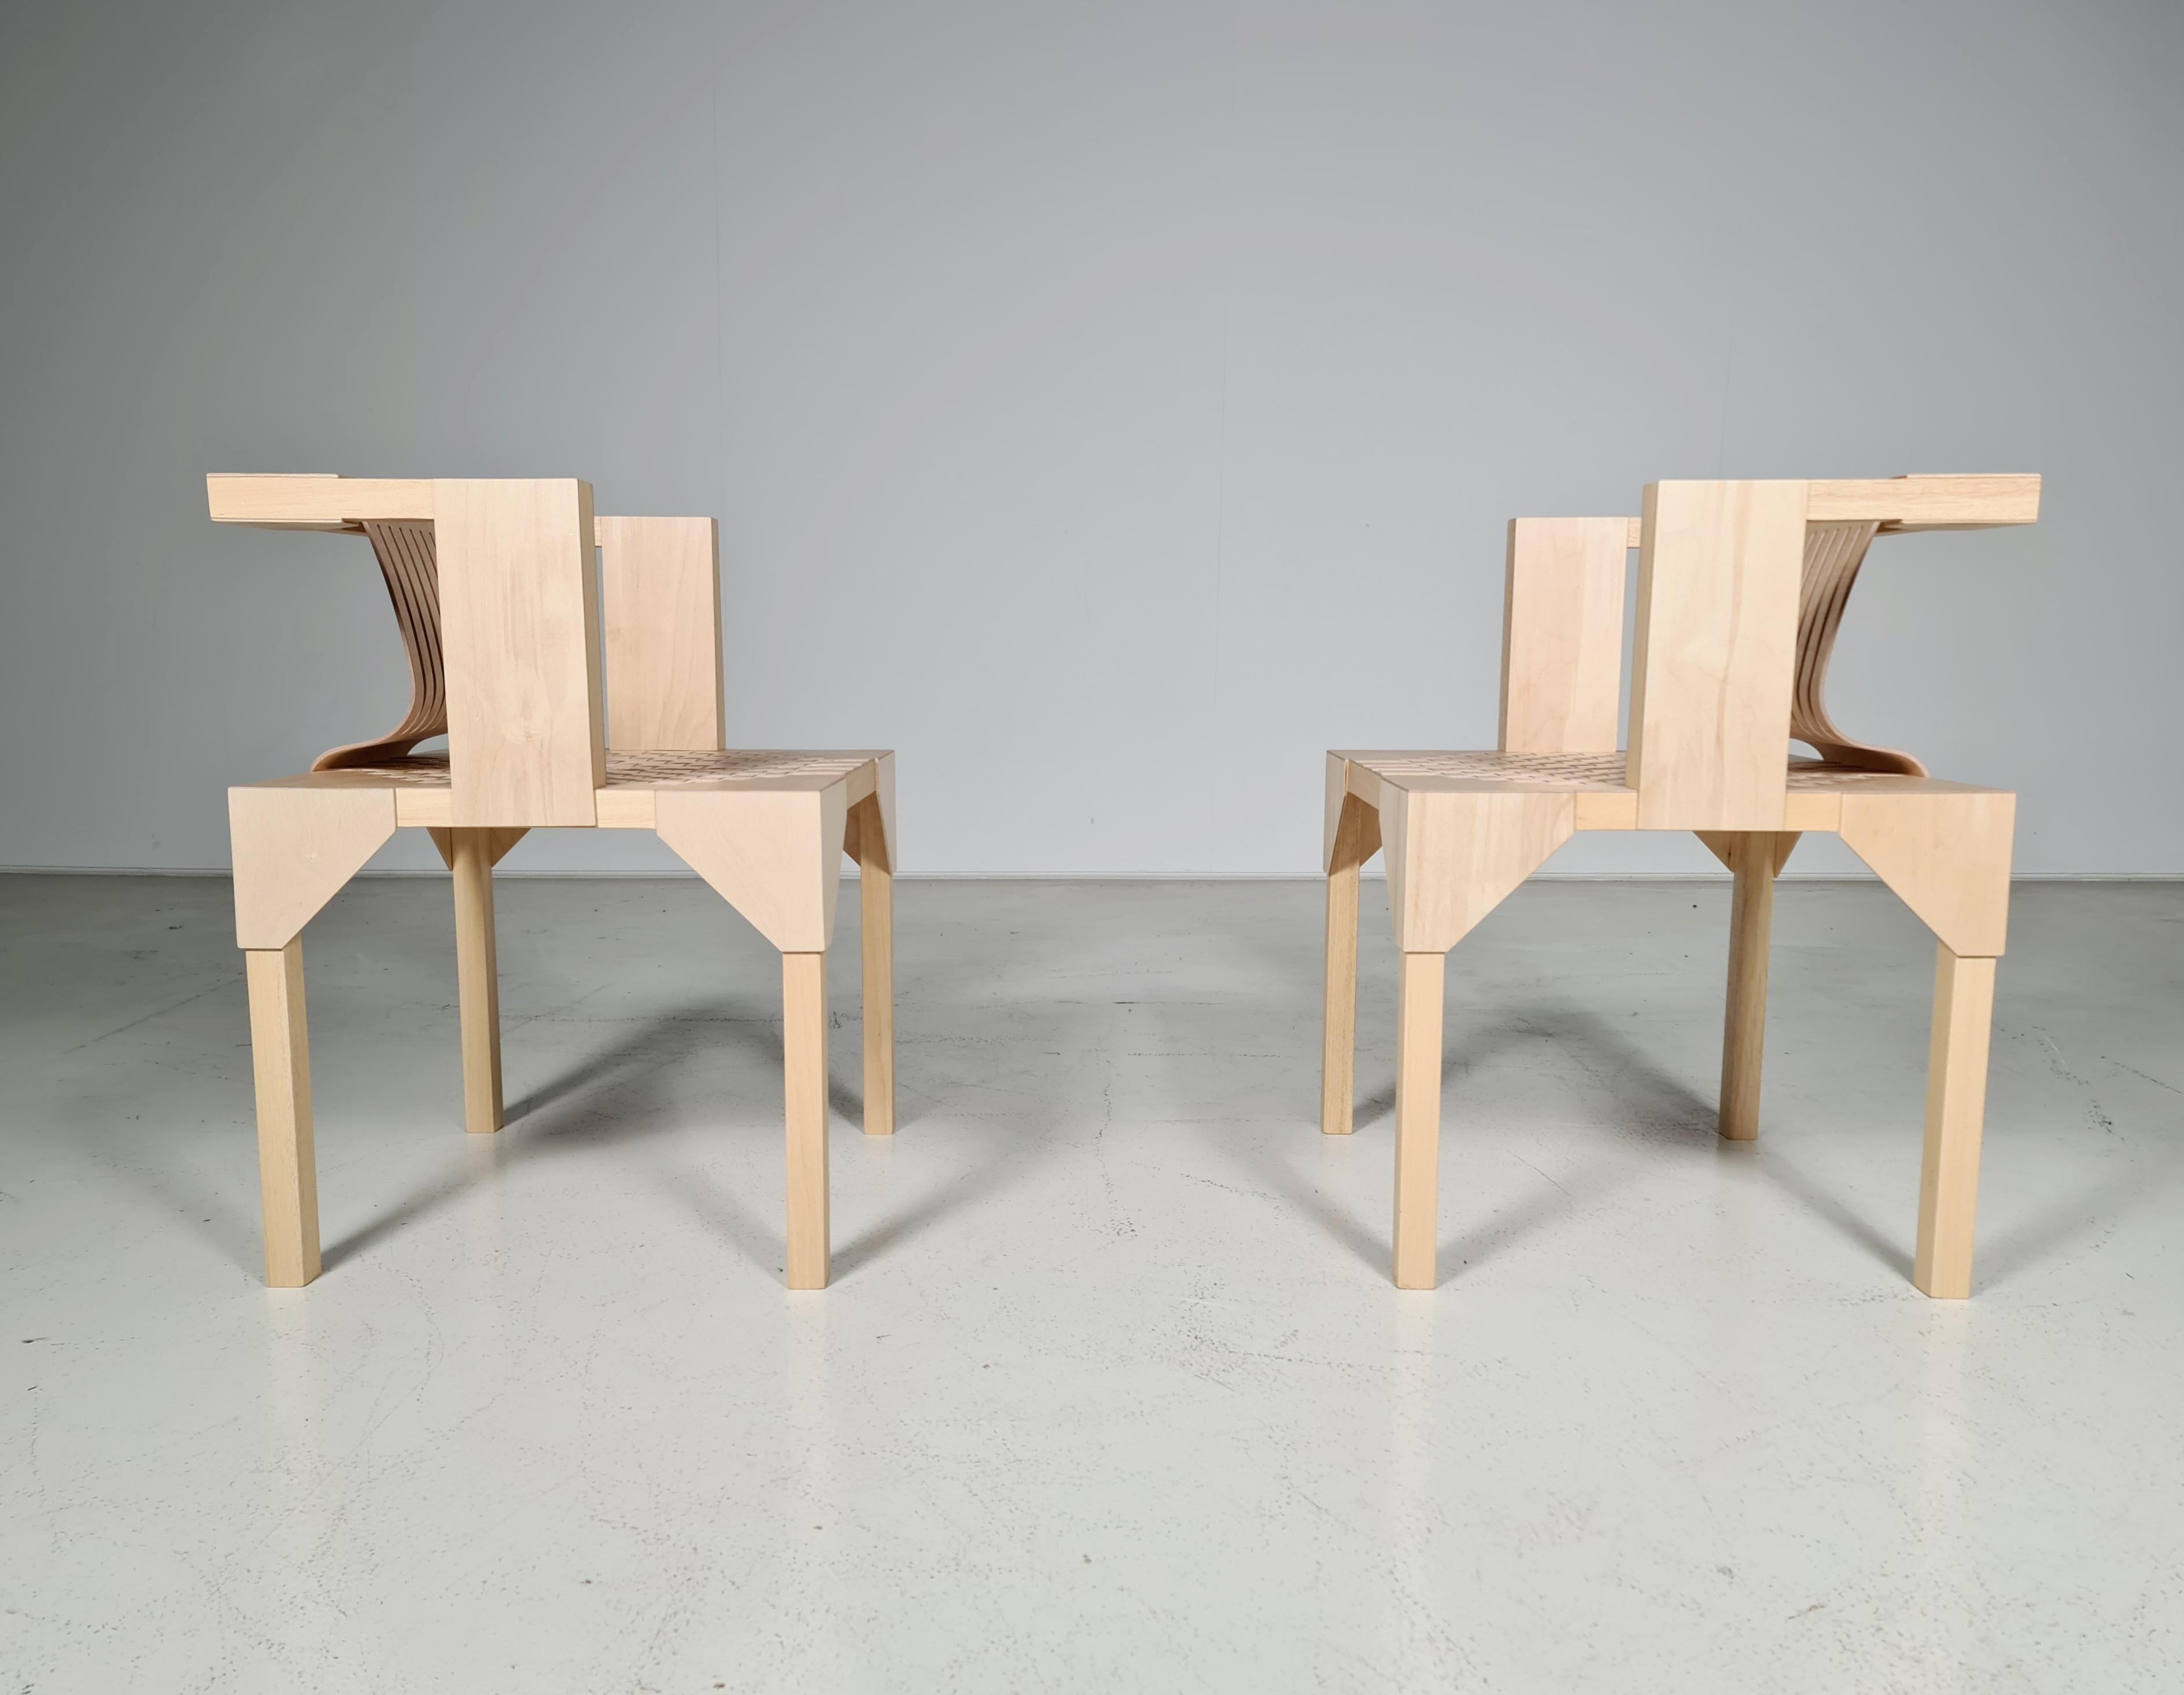 Birch Ruud Jan Kokke Chair 40, The Netherlands, 1990 For Sale